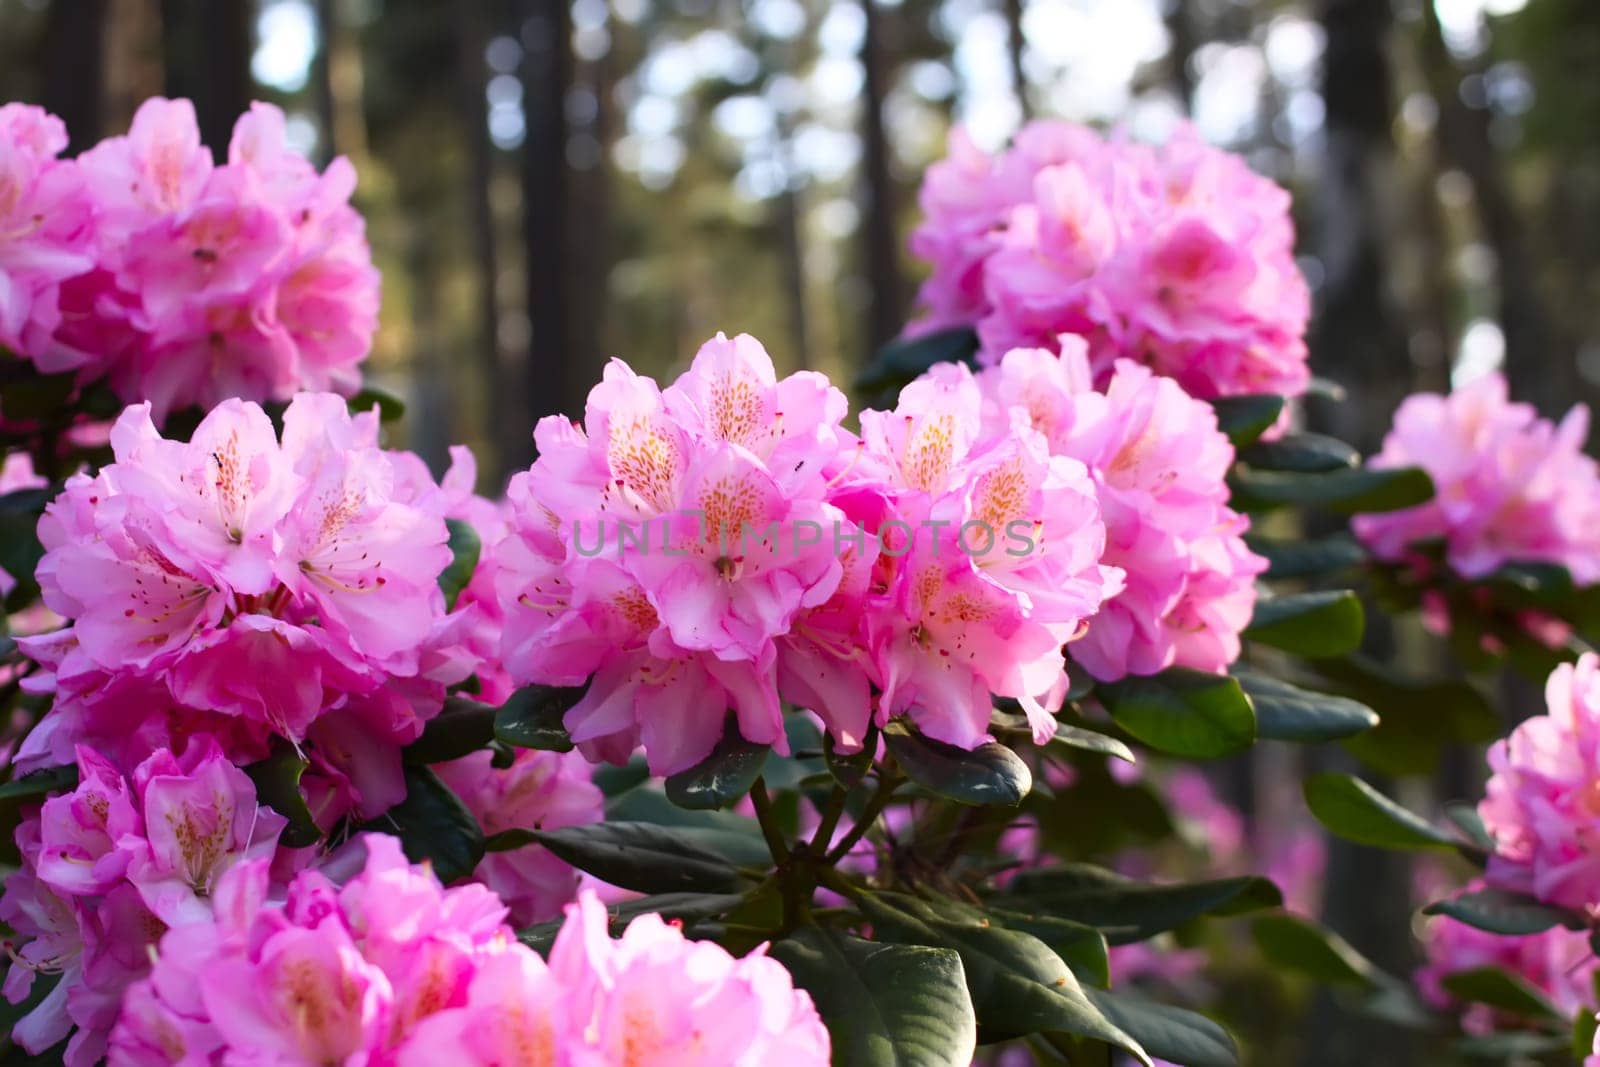 Rhododendron plants in the garden. Pink flowers close up.